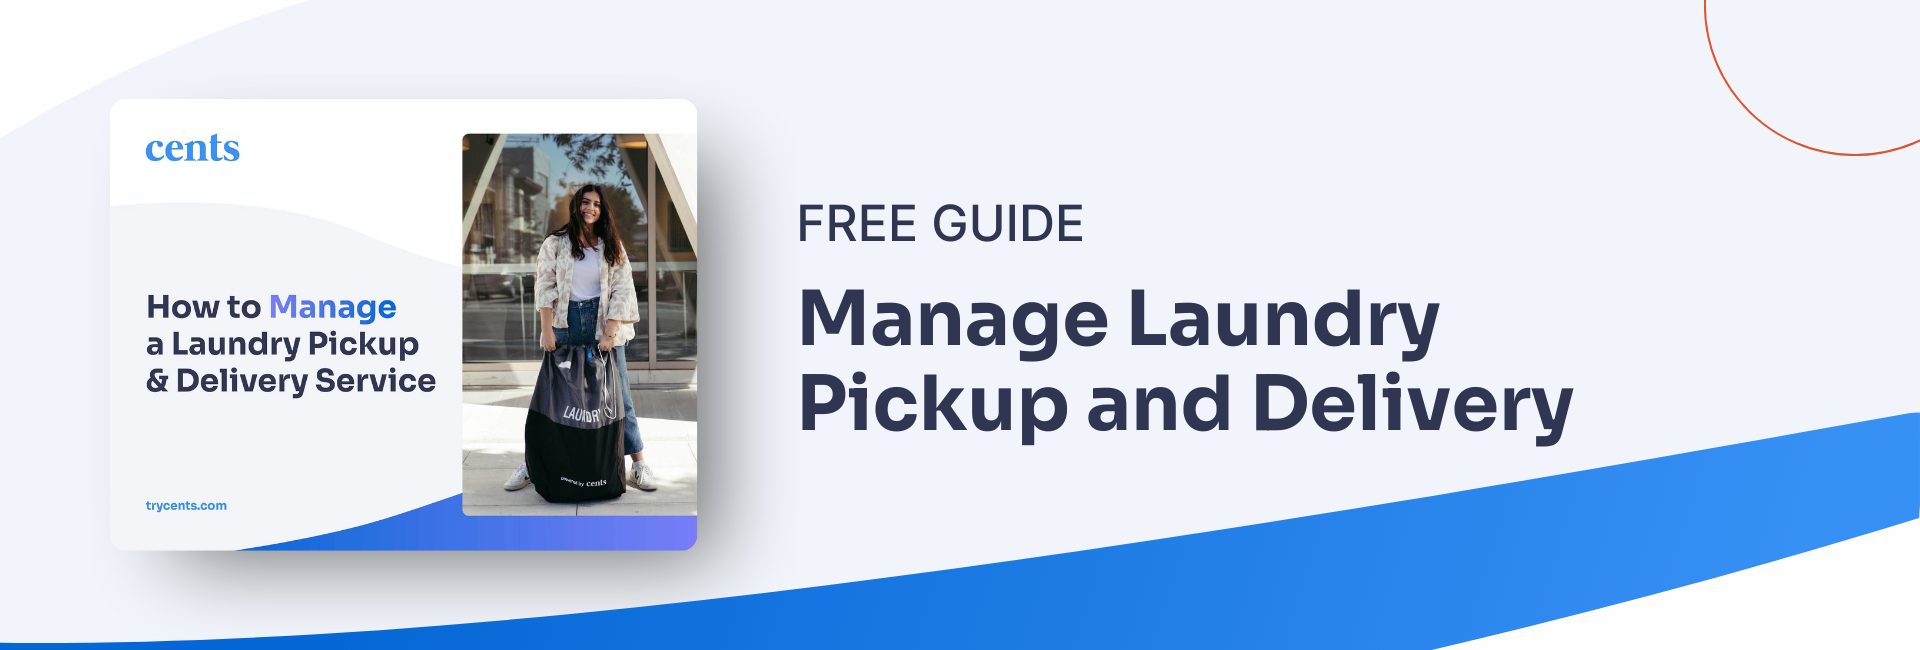 In-line Blog CTA - Manage Pickup and Delivery Service